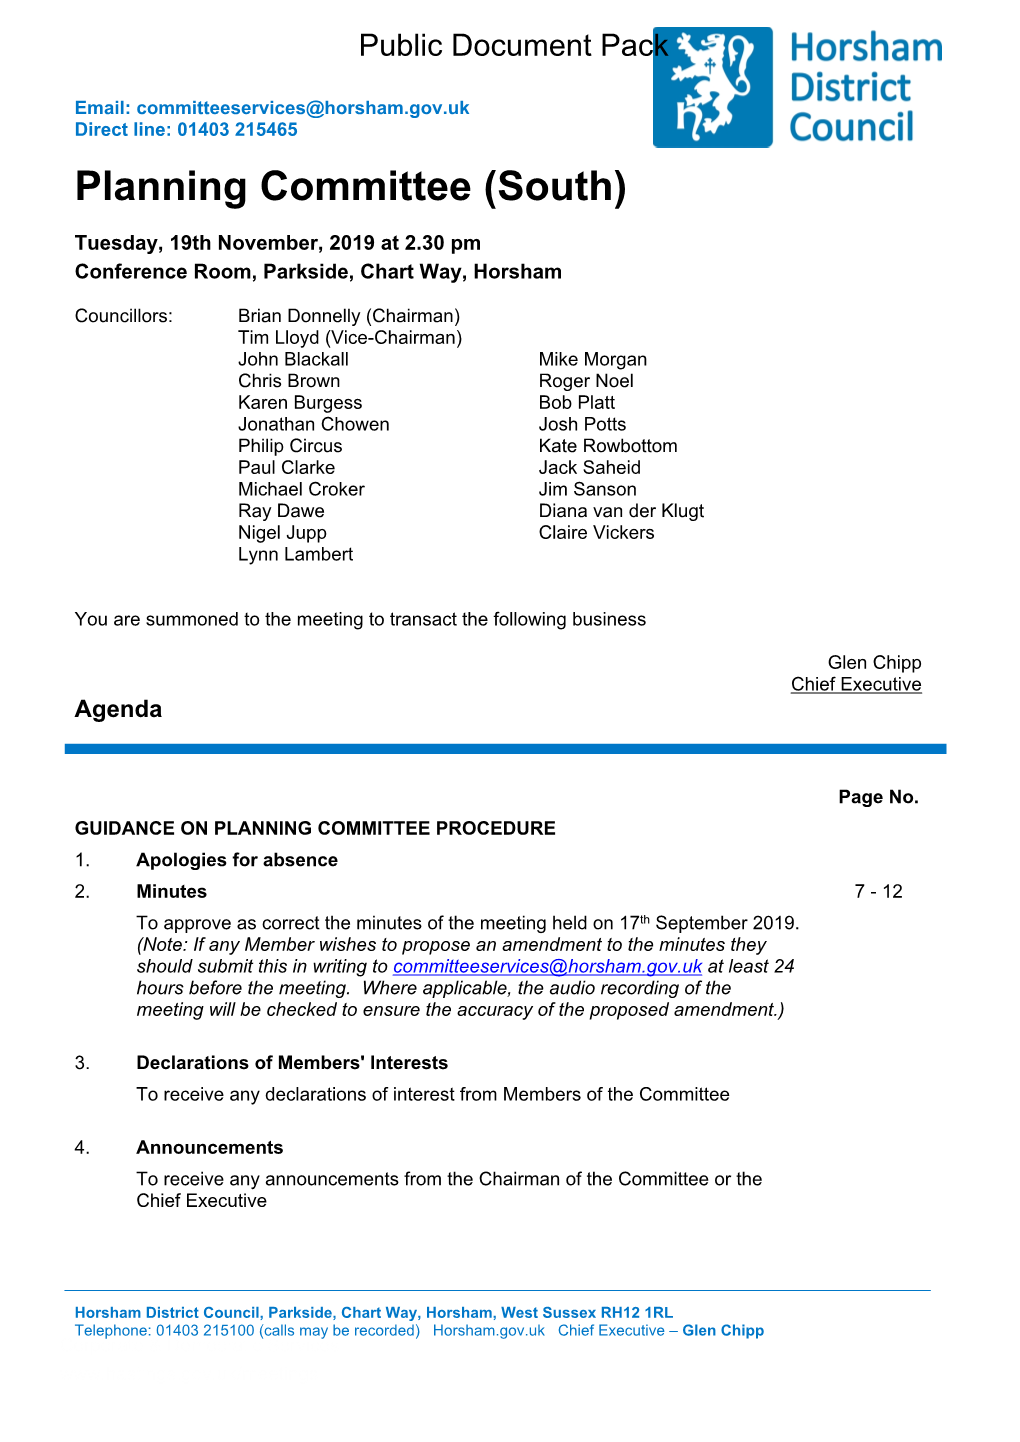 (Public Pack)Agenda Document for Planning Committee (South), 19/11